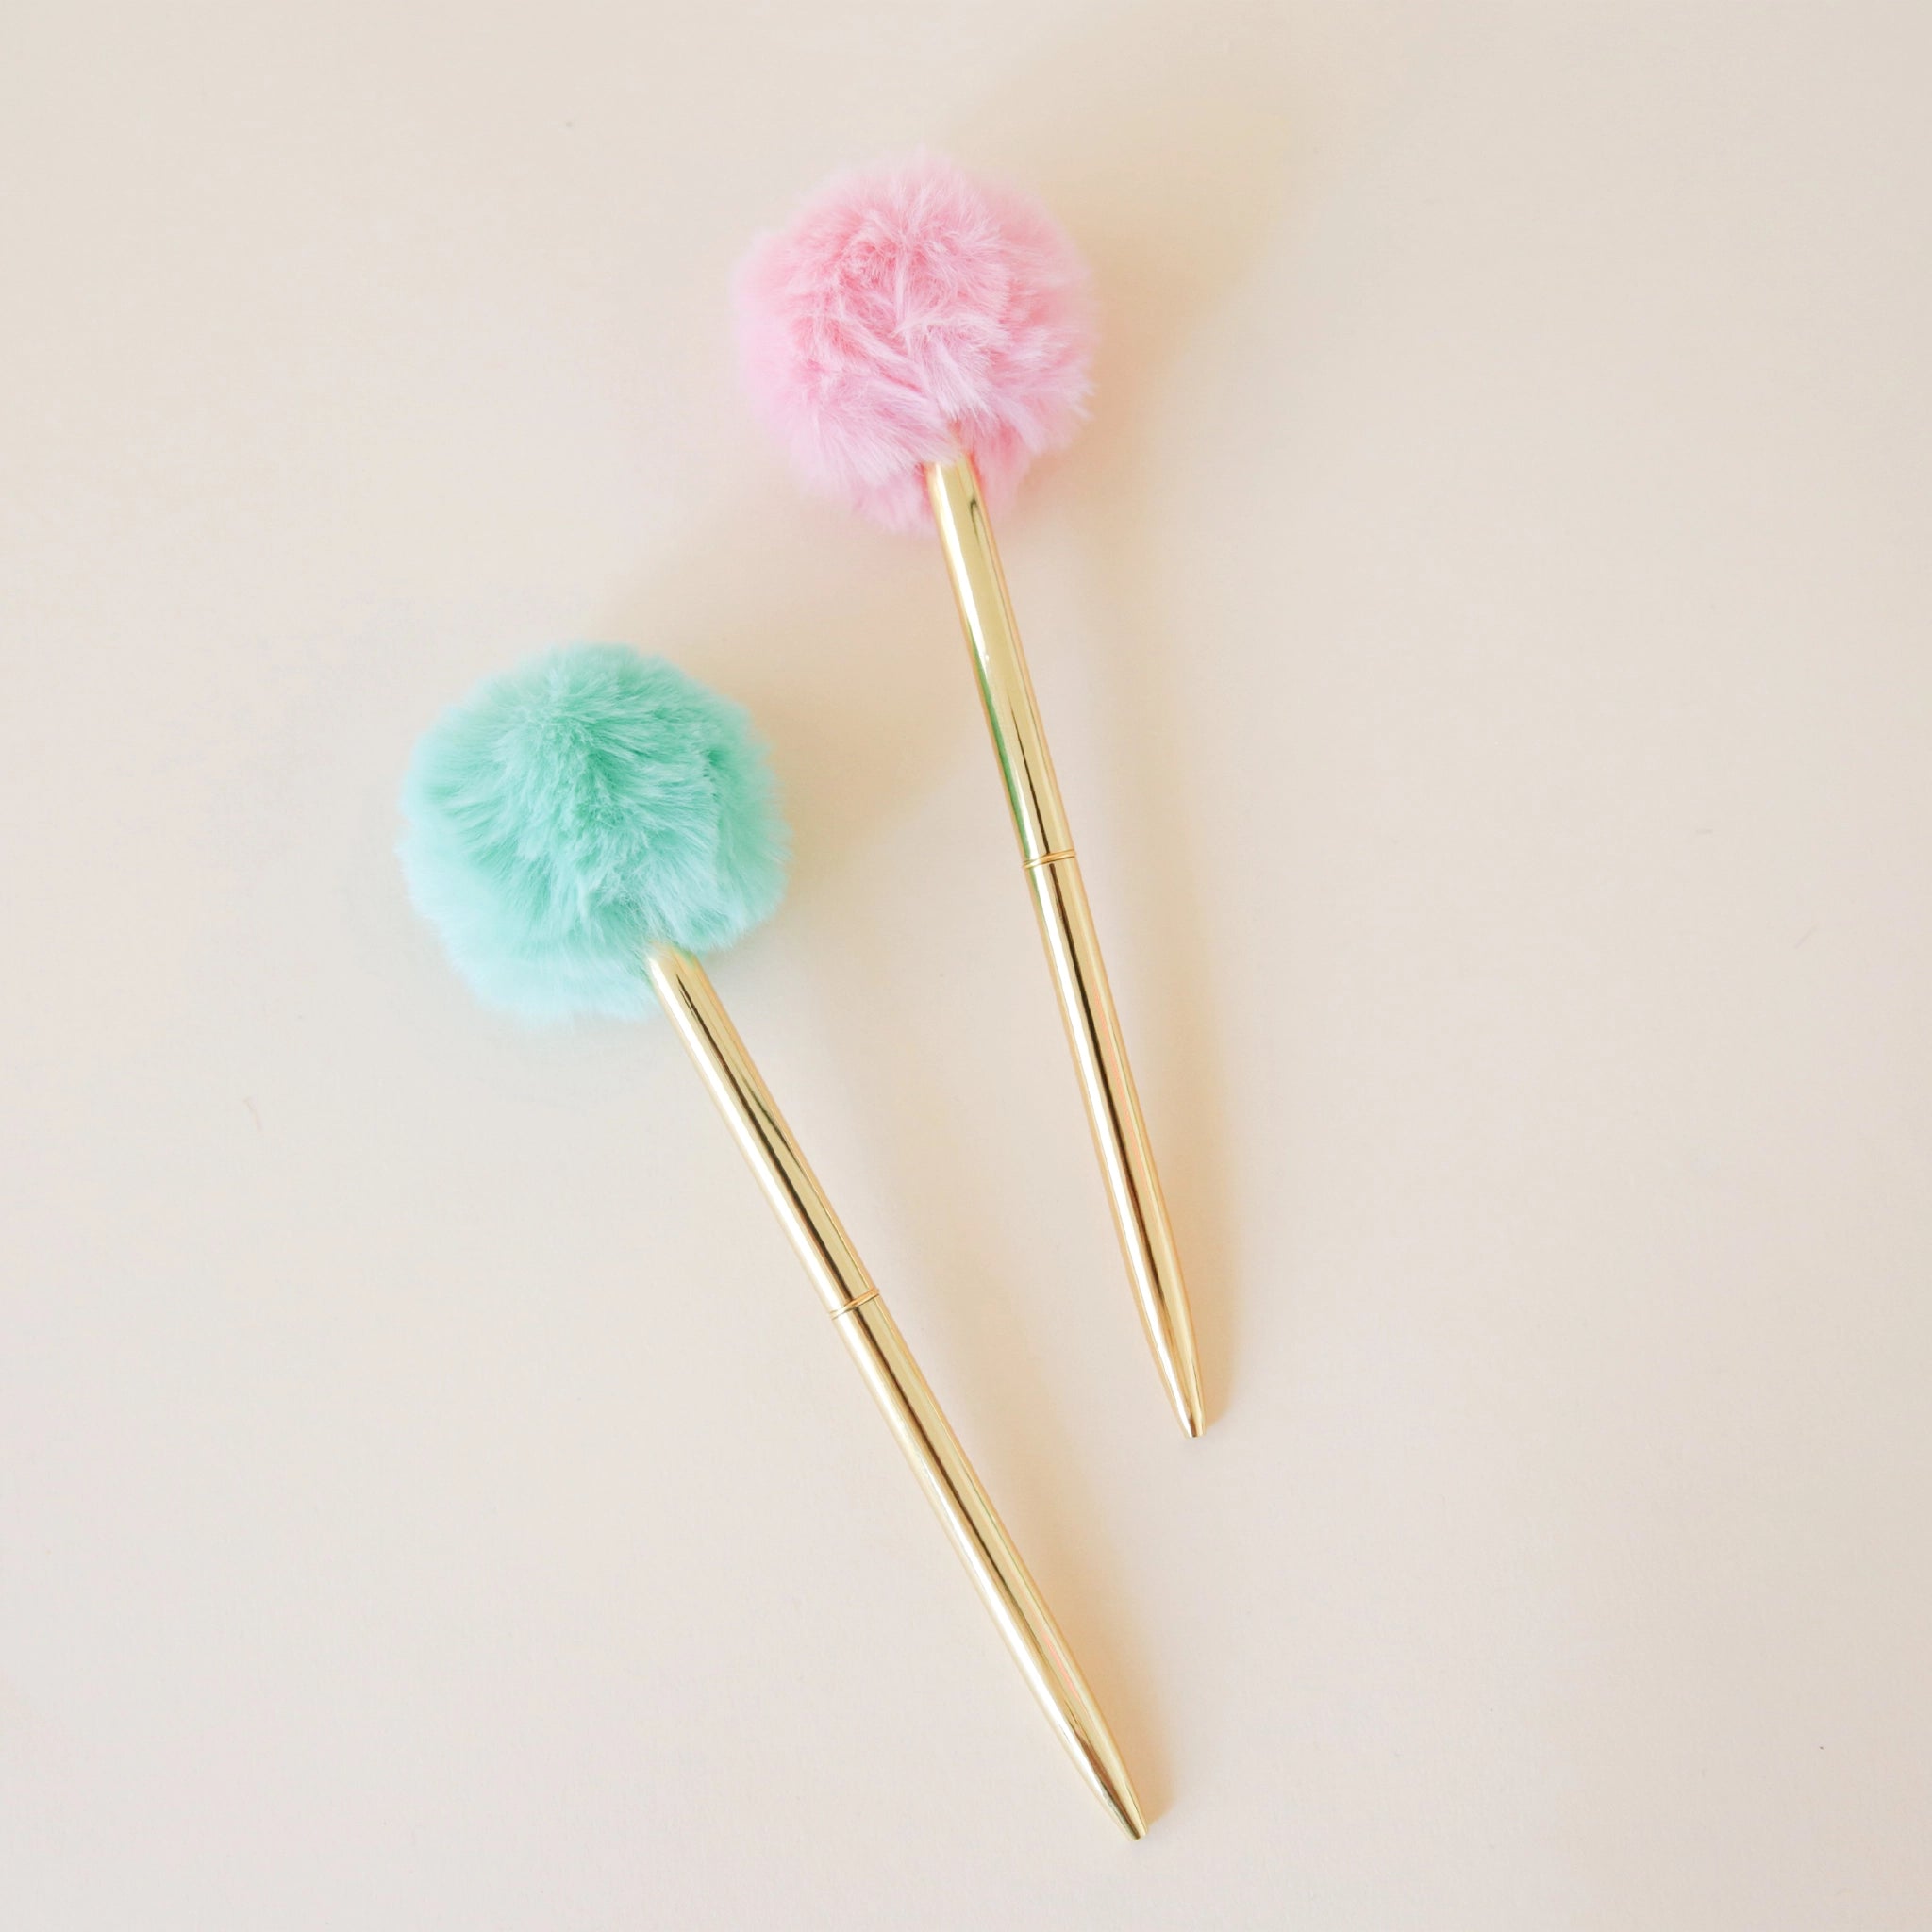 two thin gold pens. one with a fluffy mint green pom pom at the end and the other with a pink pom pom